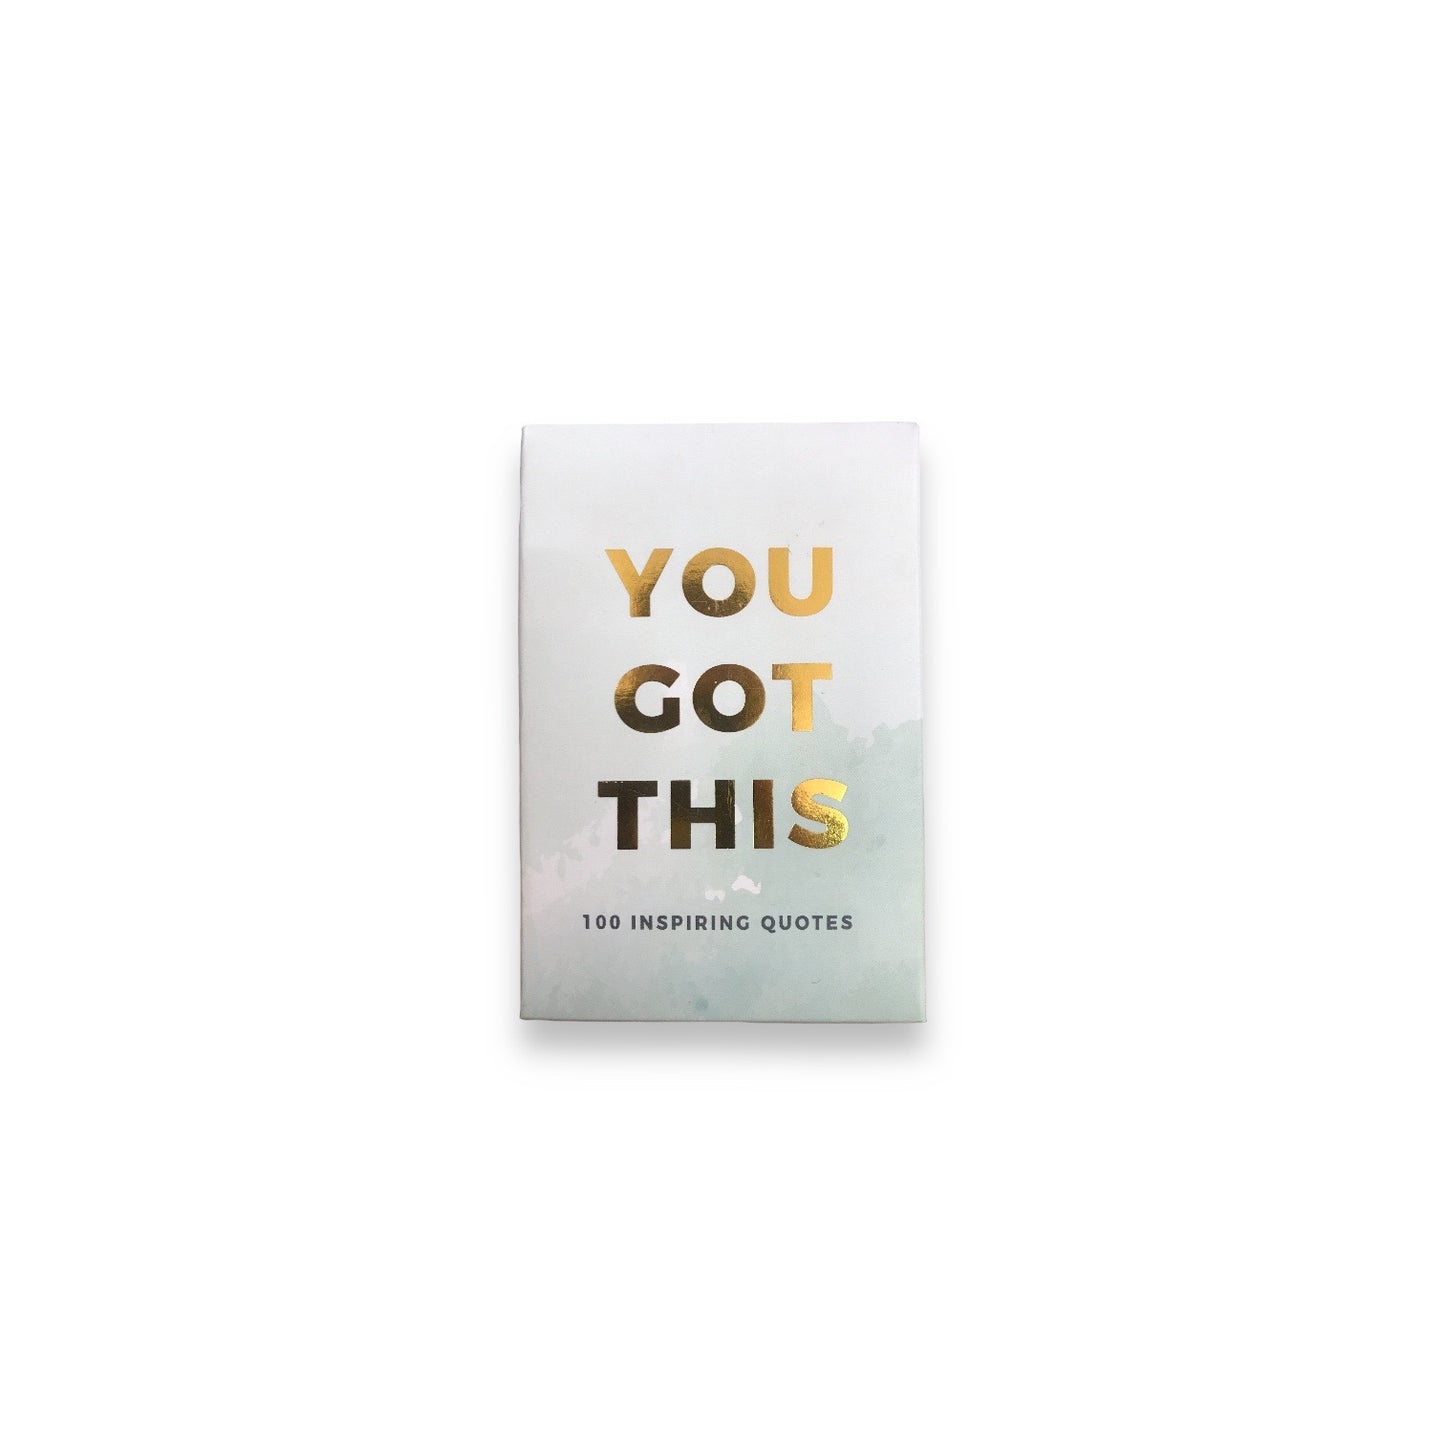 You Got This - Words Of Inspiration- Card Deck